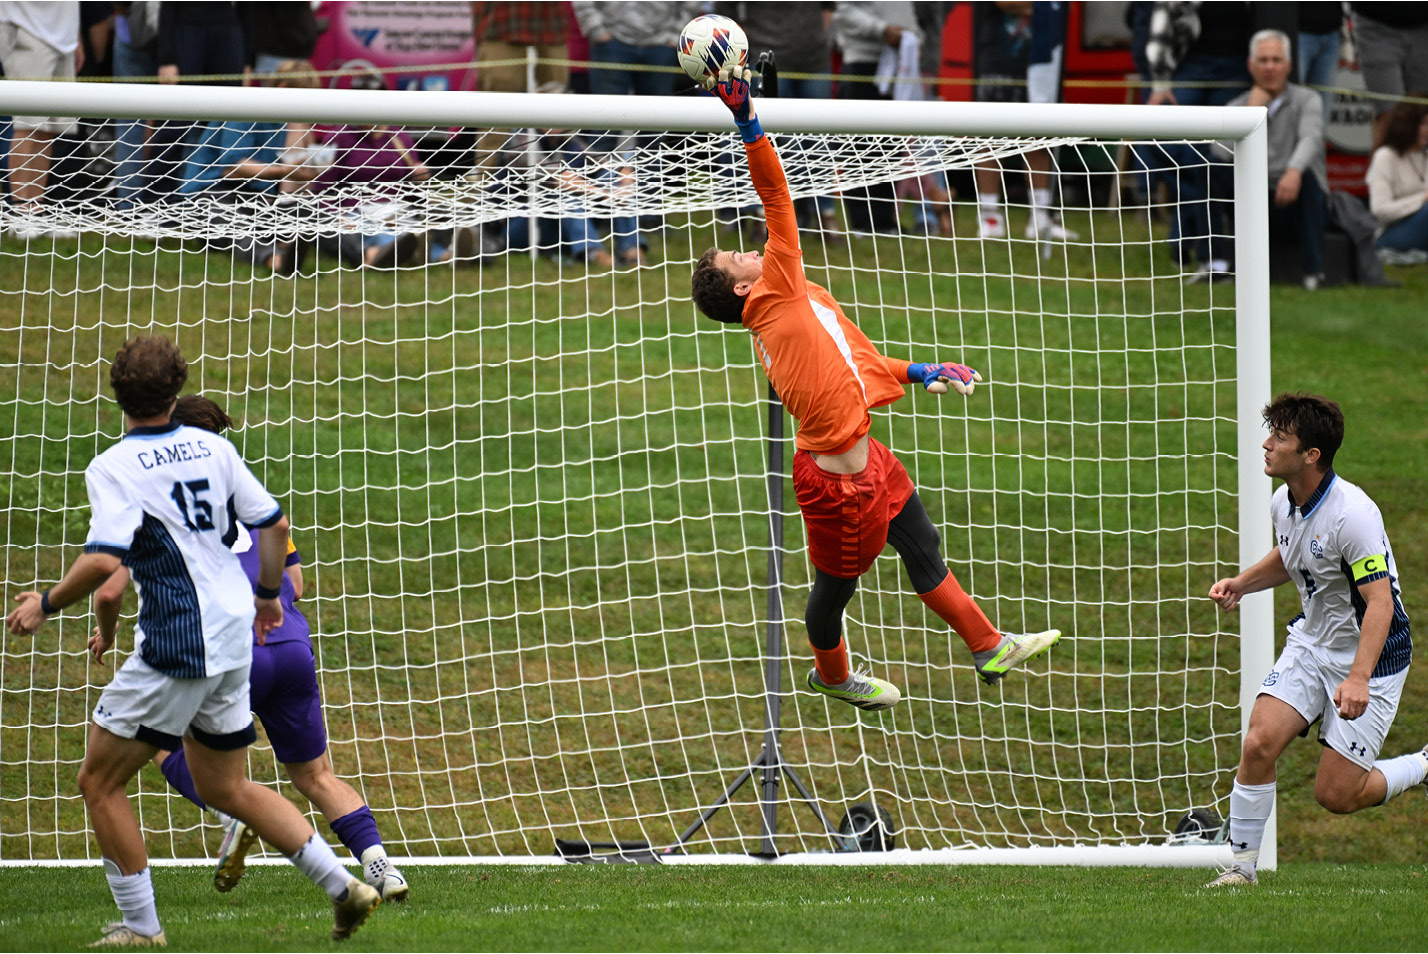 Connecticut College goalie Peter Silveste '25 makes a save against Williams College in NESCAC men’s soccer action Saturday, October 7, 2023 on Freeman Field.